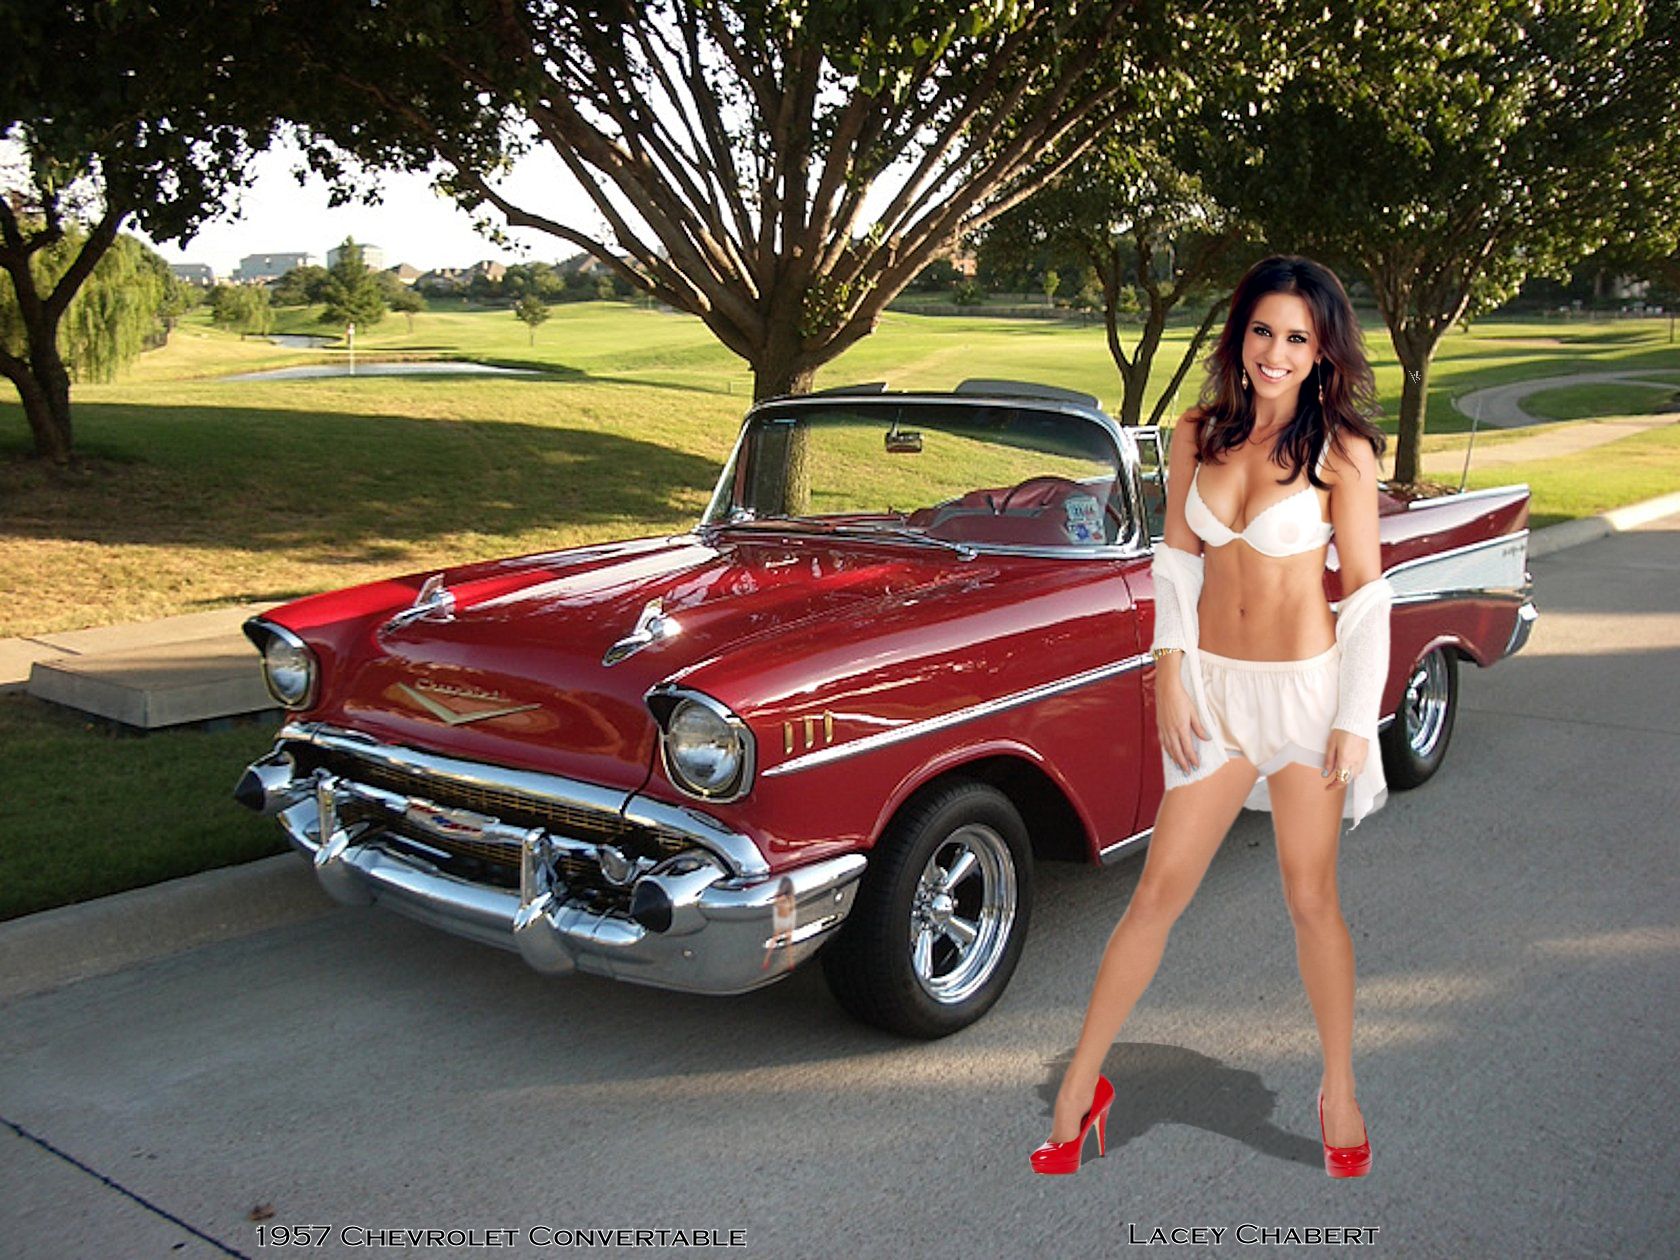 Lacey Chabert Sexy Posing With 1957 Chevrolet, MyCelebrityFakes.com